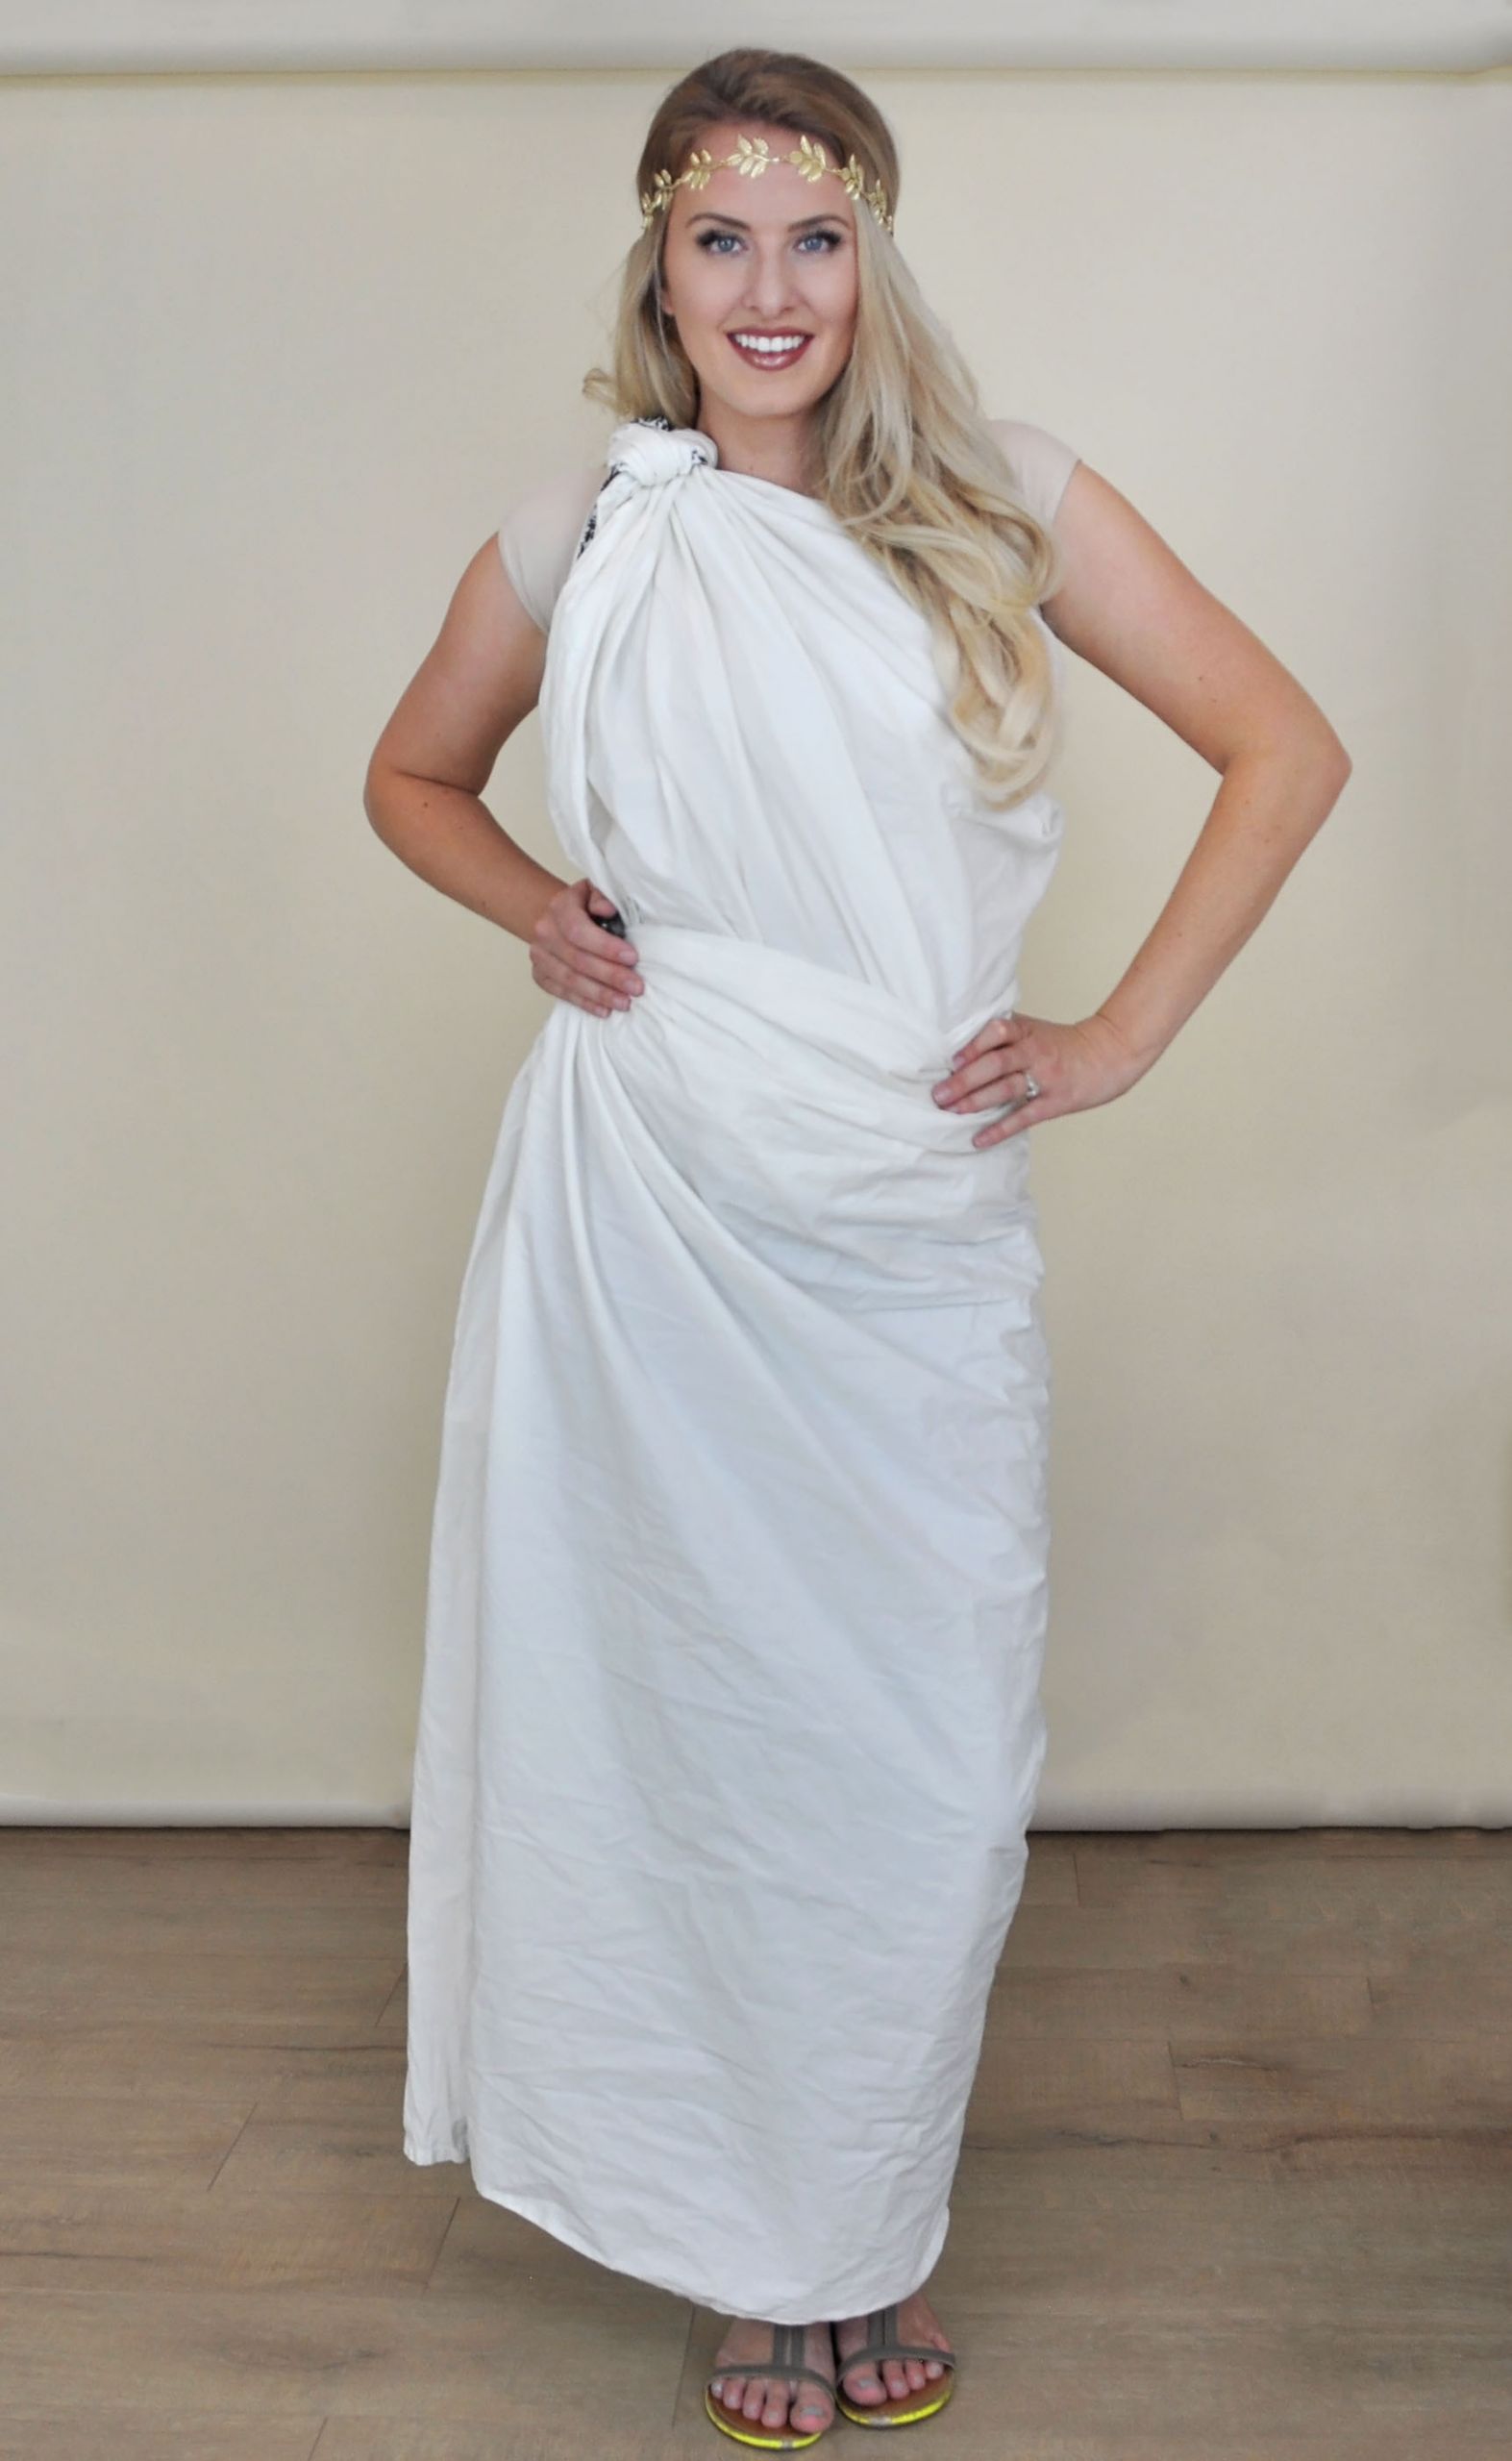 DIY Toga Costume
 5 Creative Sheet Costumes–without damaging the sheets